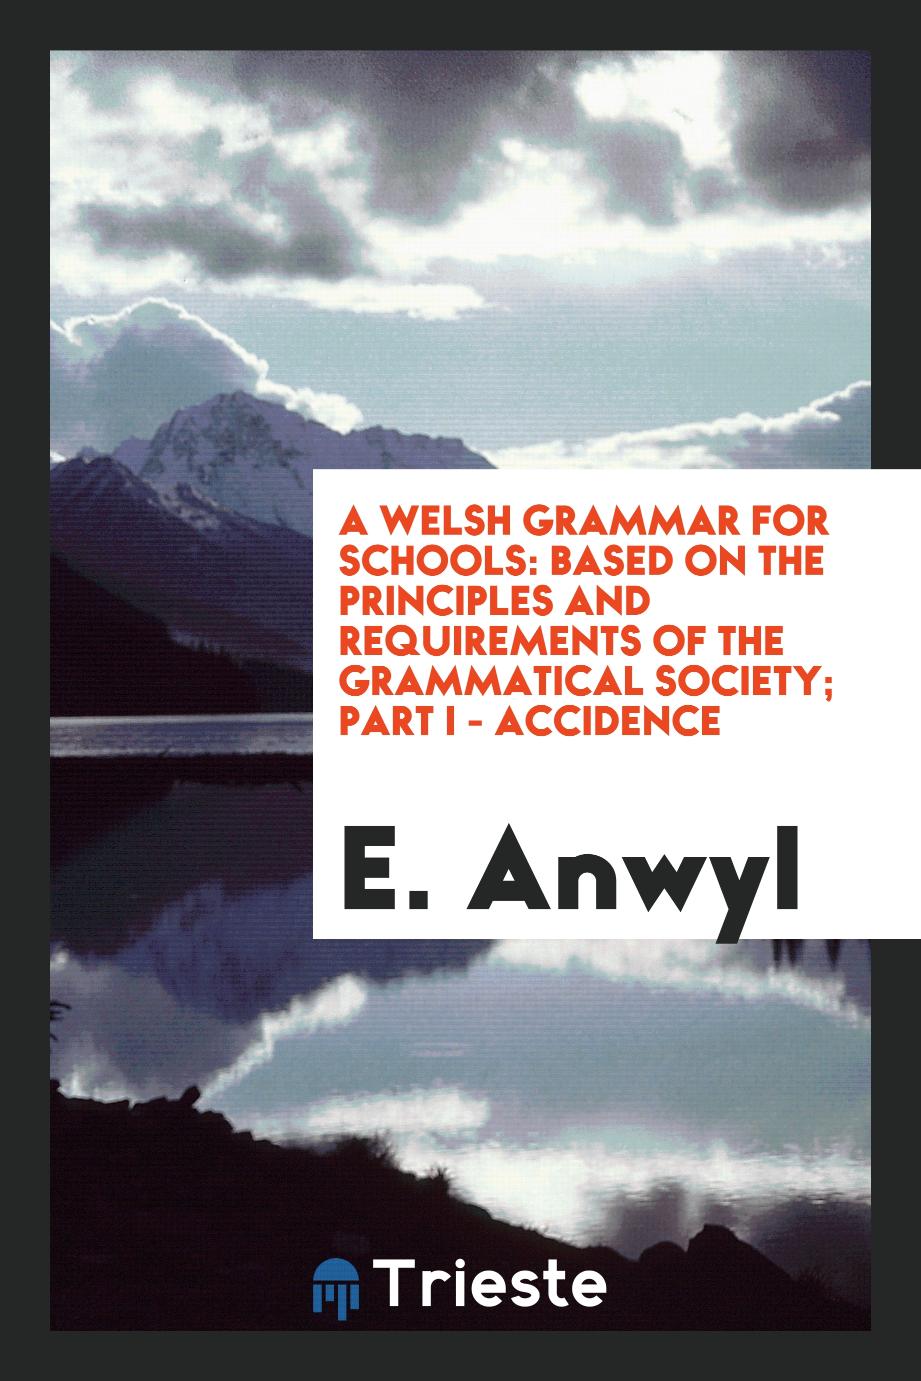 A Welsh Grammar for Schools: Based on the Principles and Requirements of the Grammatical Society; Part I - Accidence